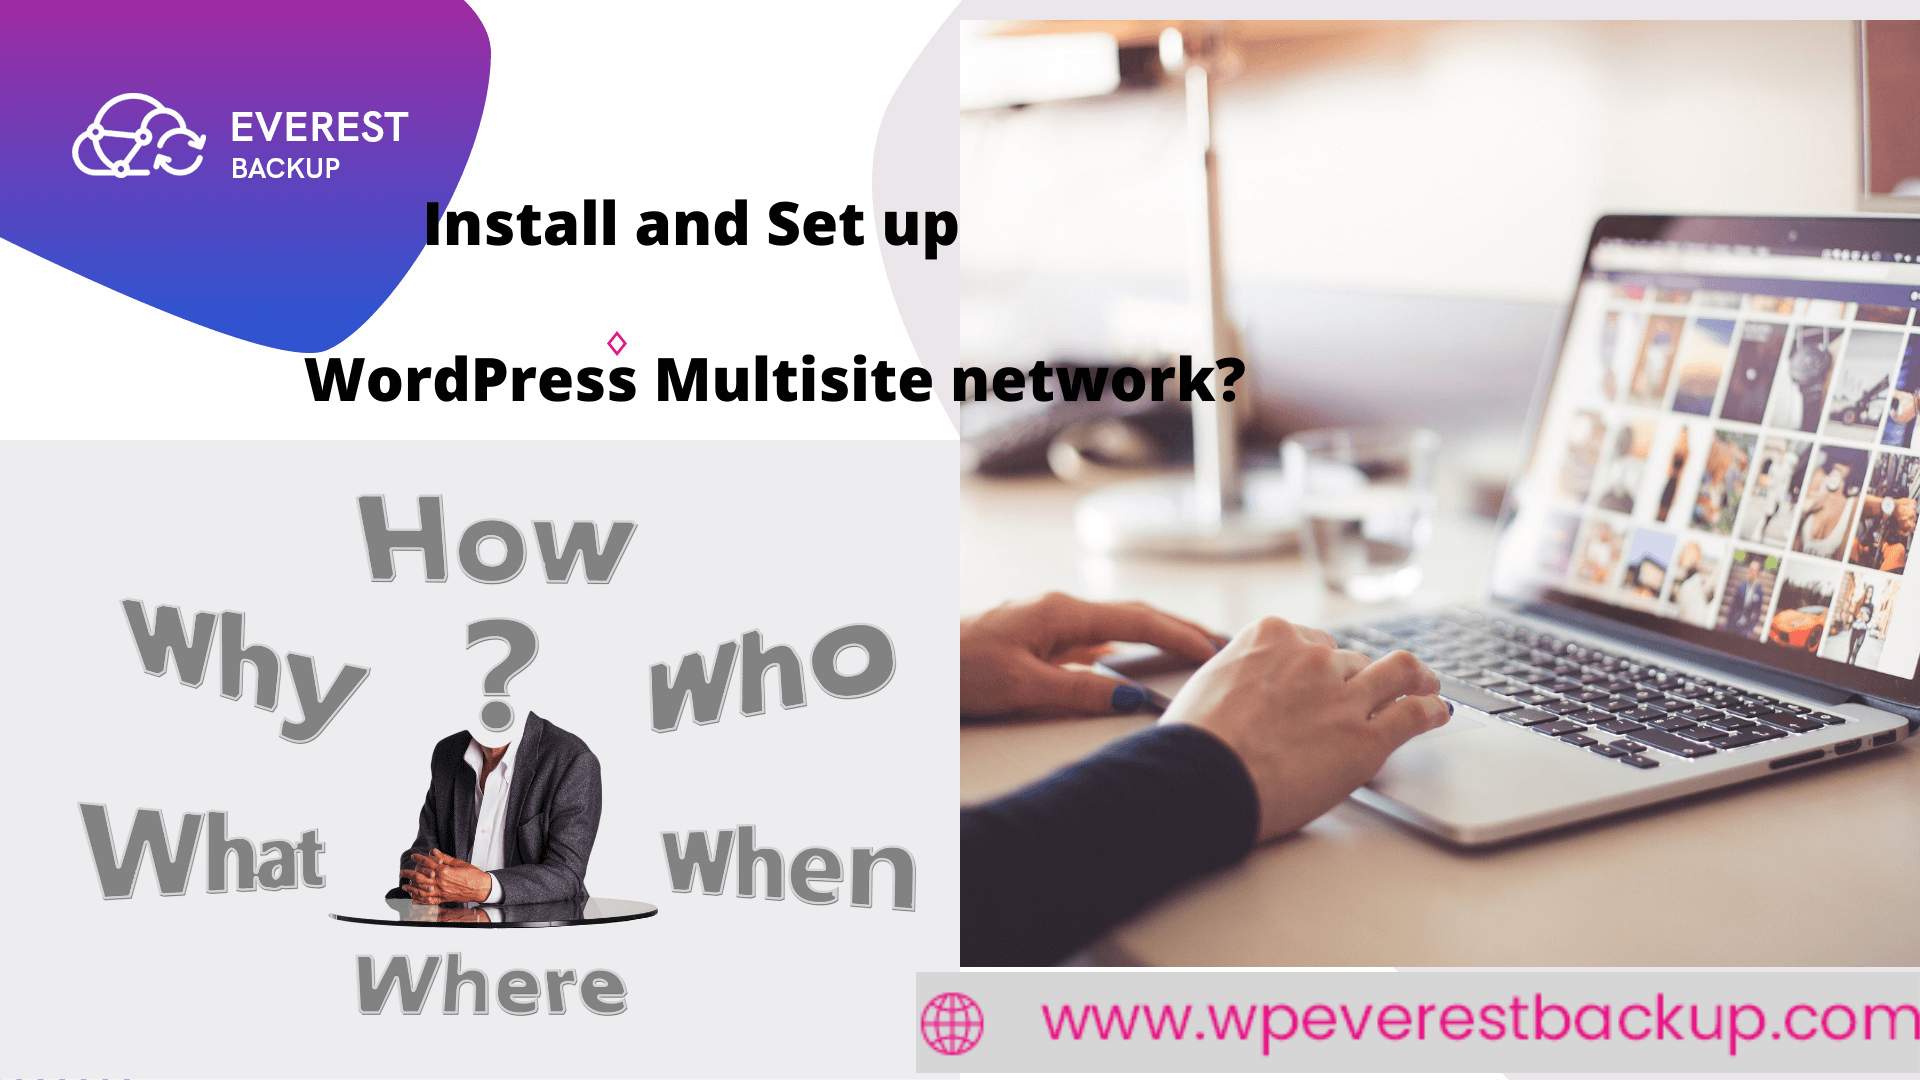 Install and setup WordPress Multisite Network